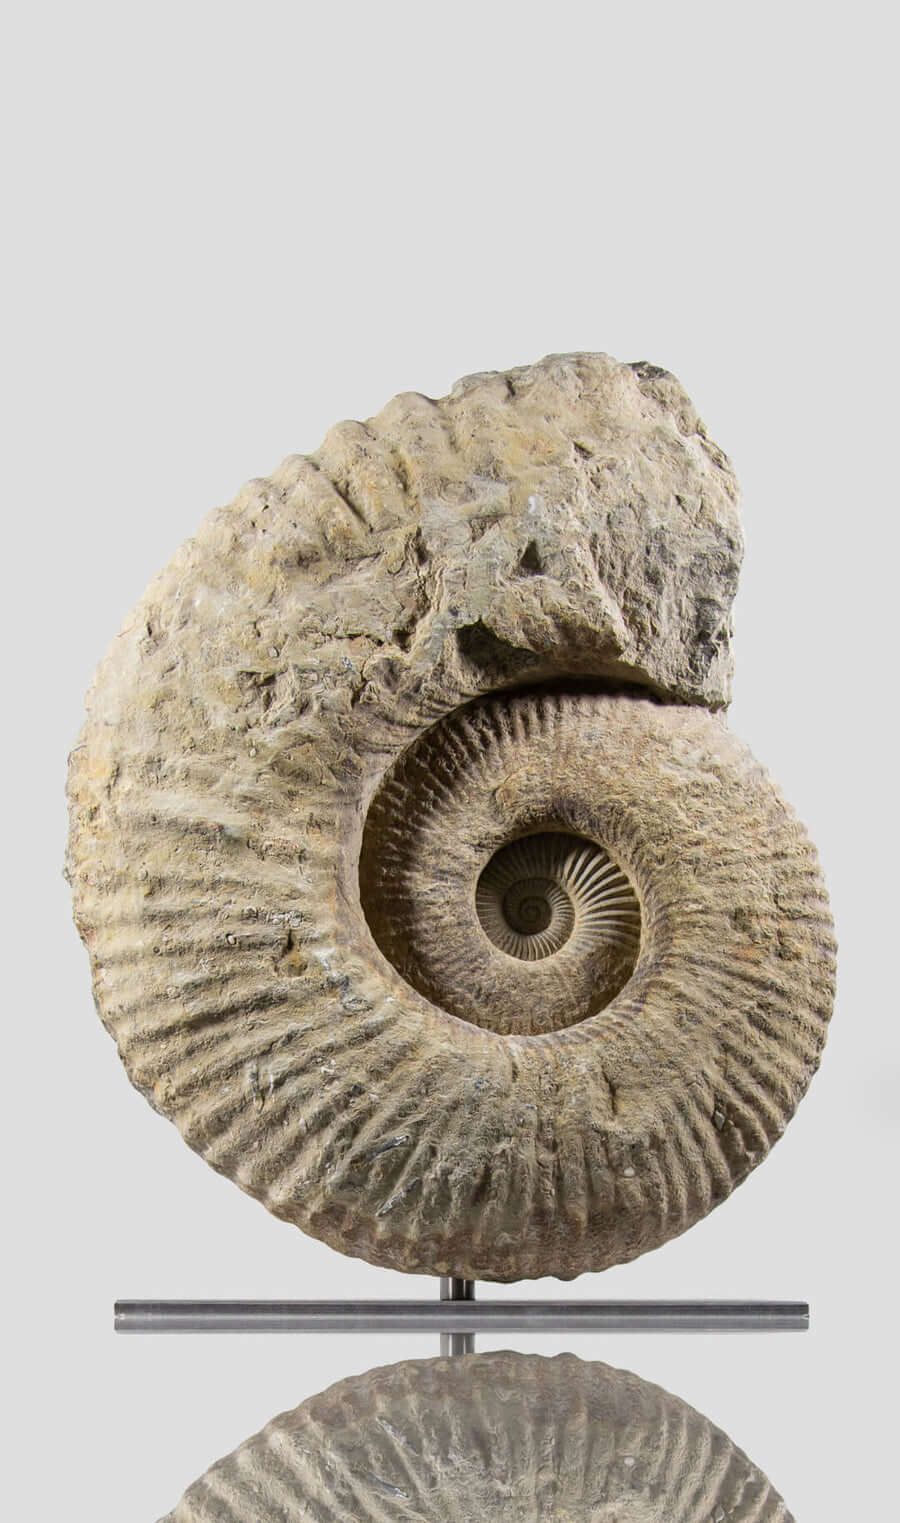 A wonderful mantelliceras ammonite for sale as an ammonite on stand